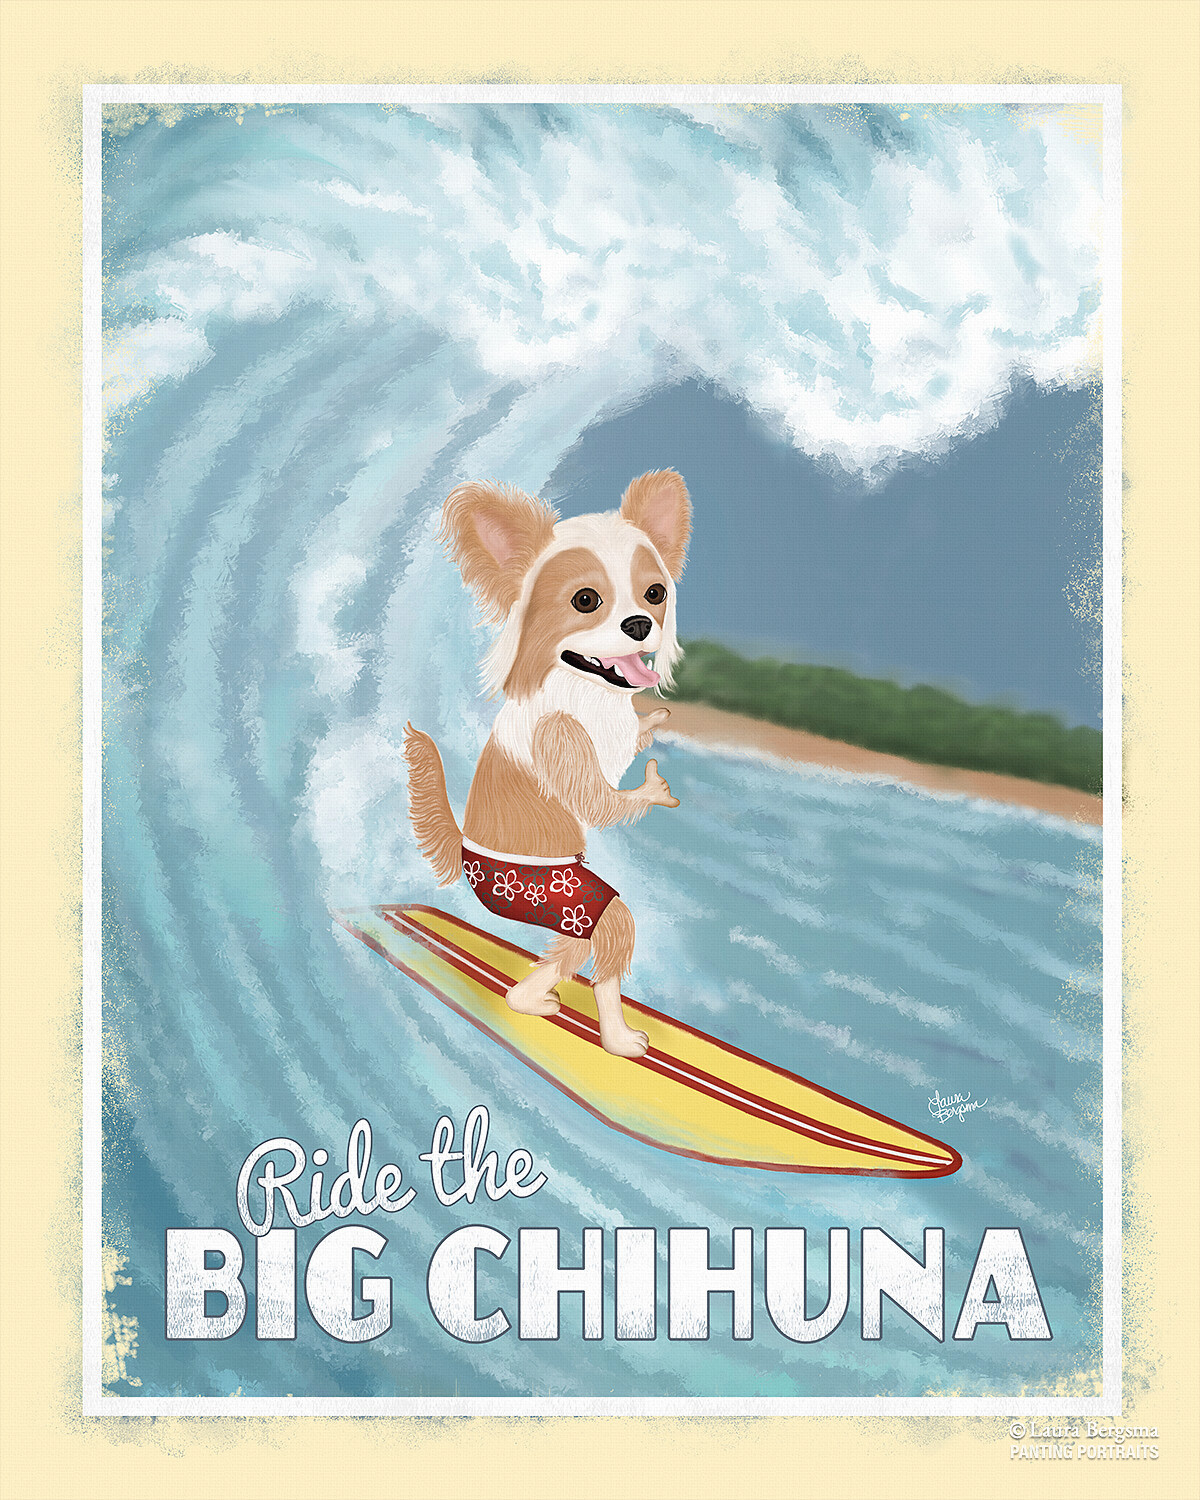 Long haired Chihuahua surfing the big wave in hawaii